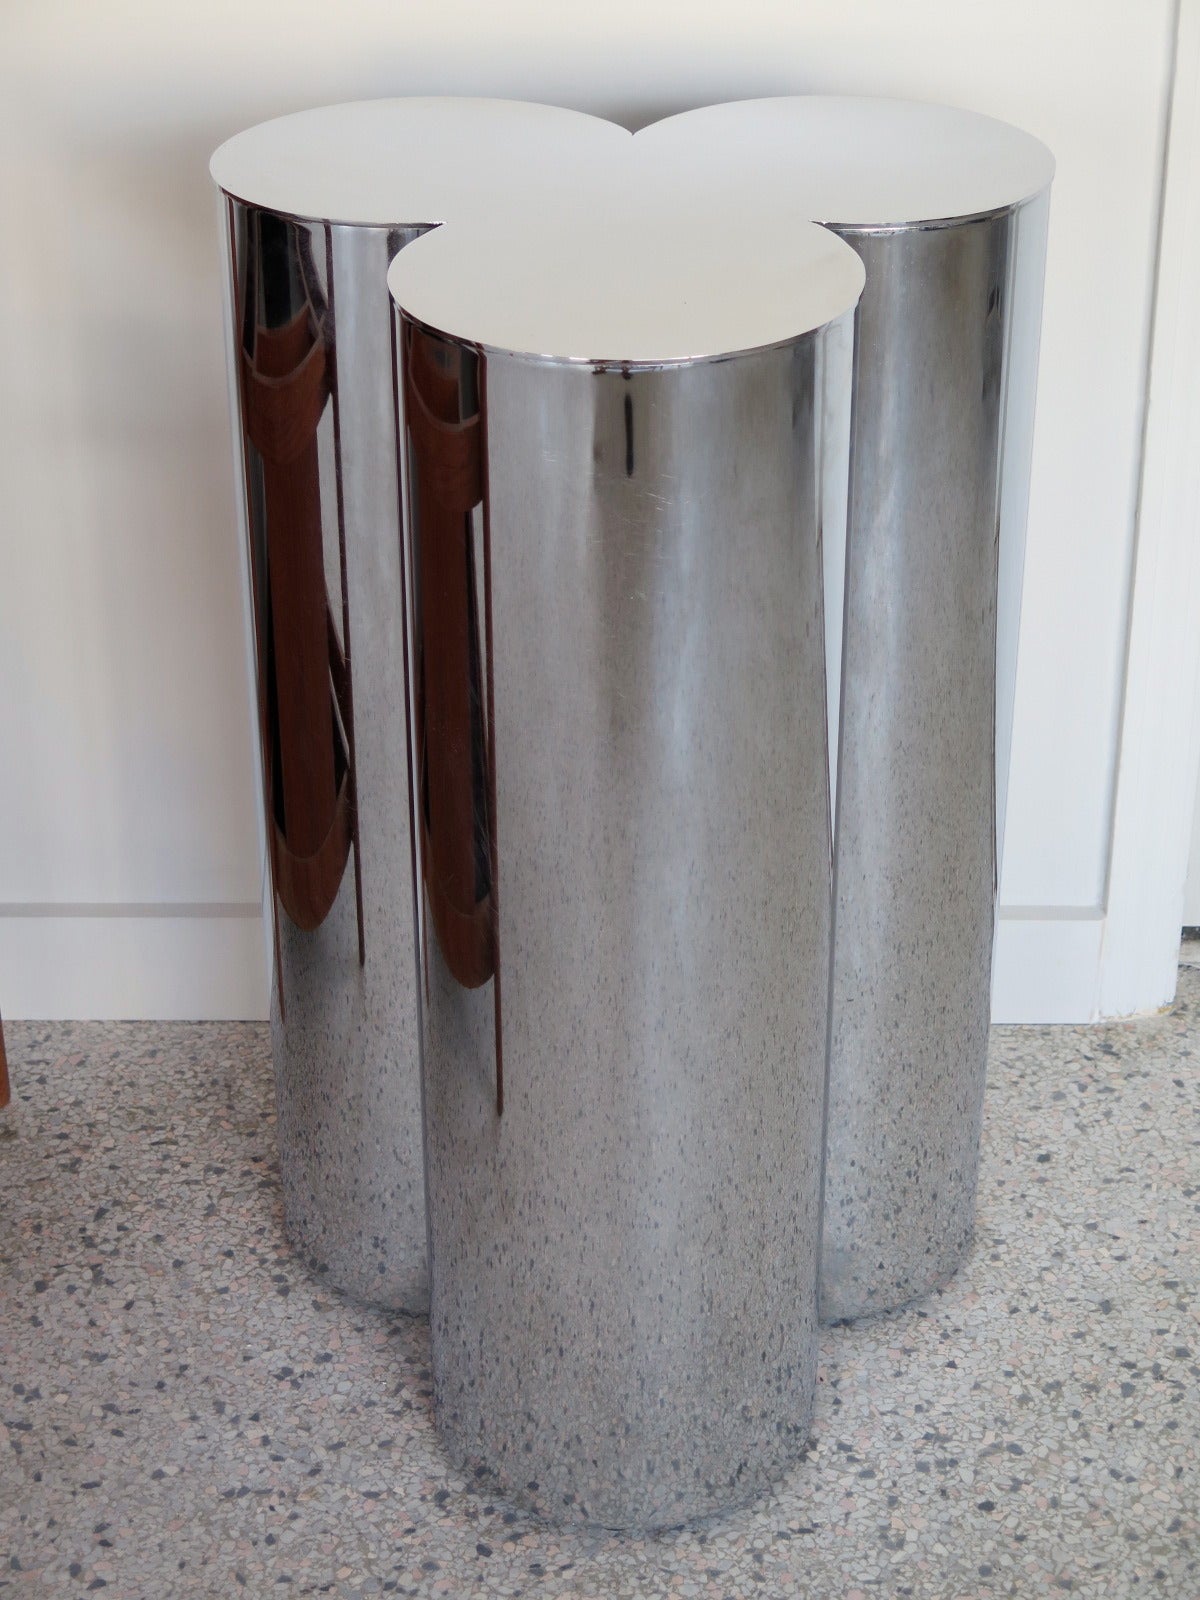 A pair of heavy chrome-plated, stainless steel pedestals by Mastercraft, circa 1960s. Dining table height could be used a dining table supports, console or individual tables. Each is 28.5